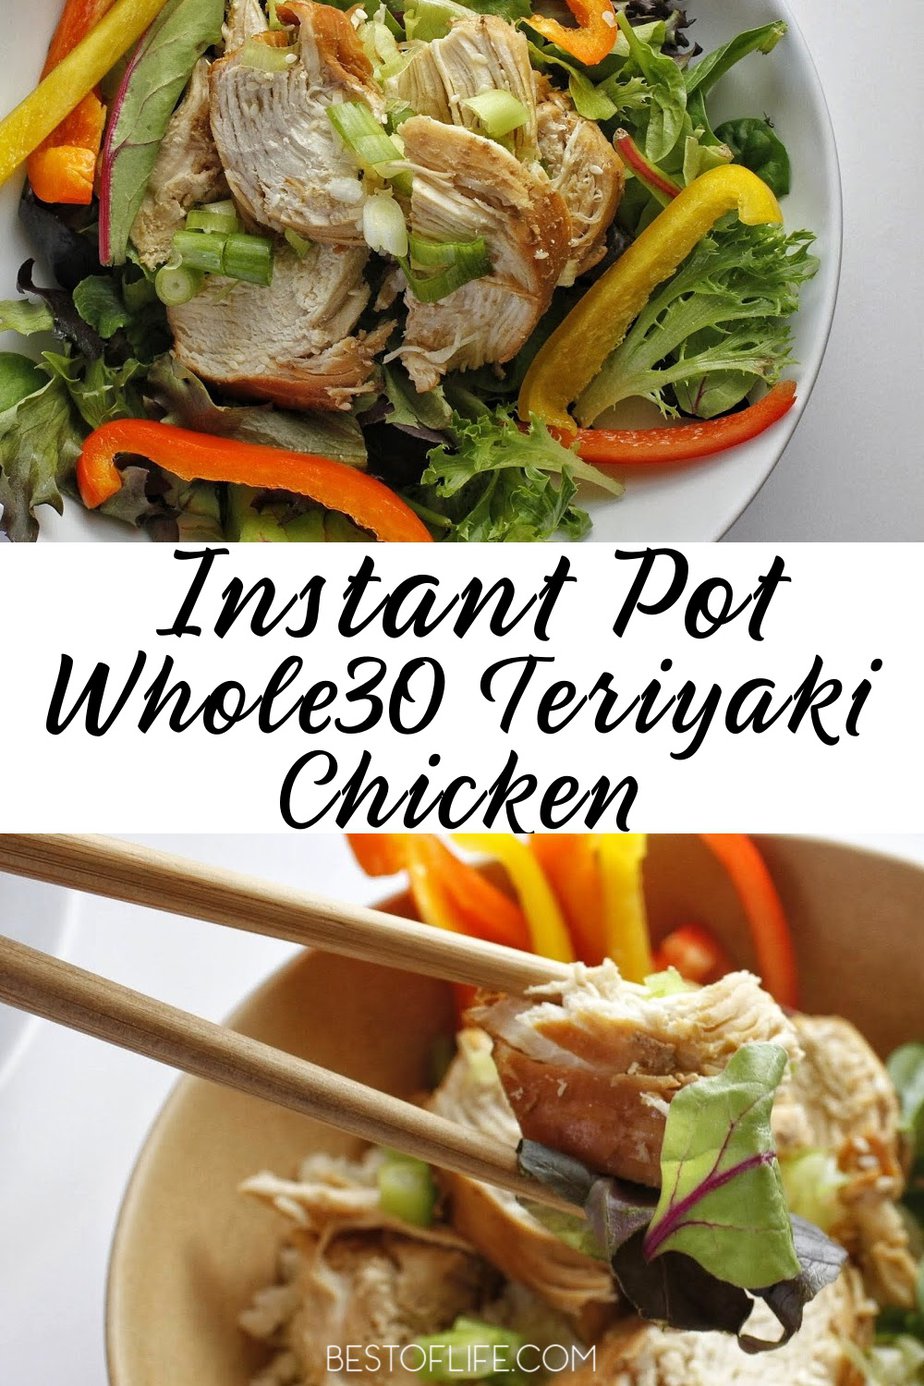 Whole30 Instant Pot teriyaki chicken is not only a healthy recipe for weight loss, but also versatile and can be served different ways for an easy healthy dinner. Teriyaki Chicken Instant Pot | Instant Pot Chicken Recipes | Pressure Cooker Chicken Recipes | Whole30 Recipes with Chicken | Whole30 Instant Pot Recipes | Easy Dinner Recipes | Healthy Dinner Ideas #dinnerrecipes #instantpot via @thebestoflife